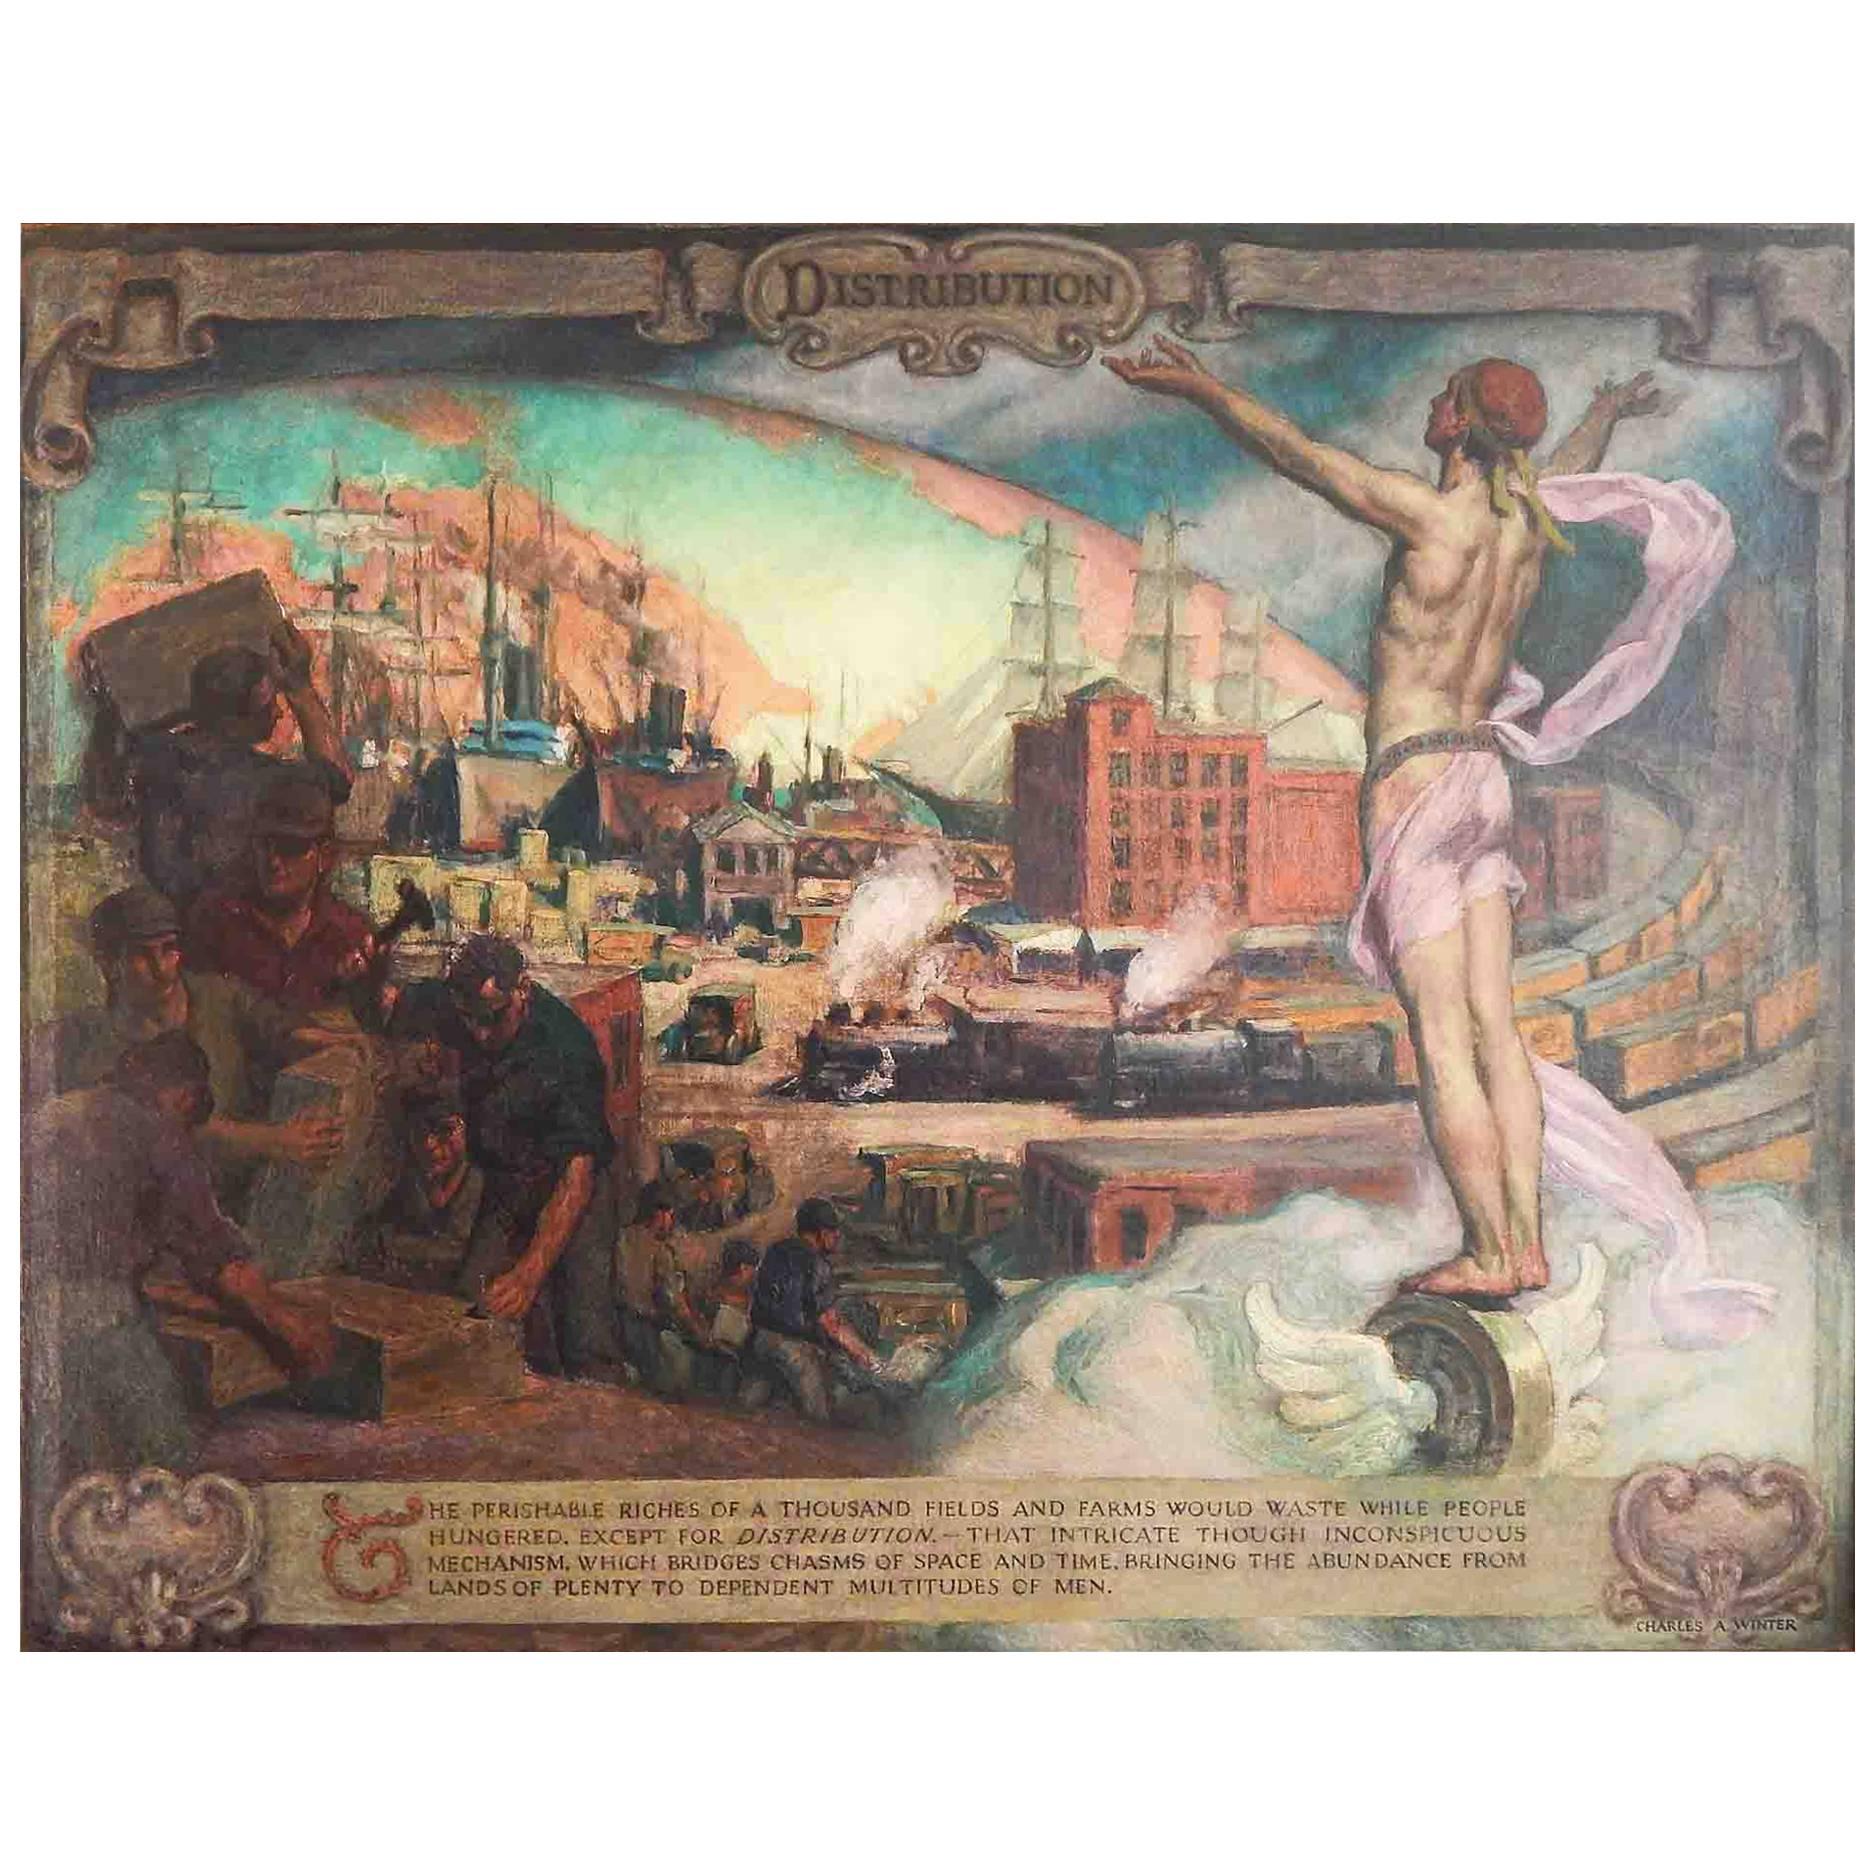 "Distribution" Fabulous, Large Art Deco Allegorical Mural with Male Nude